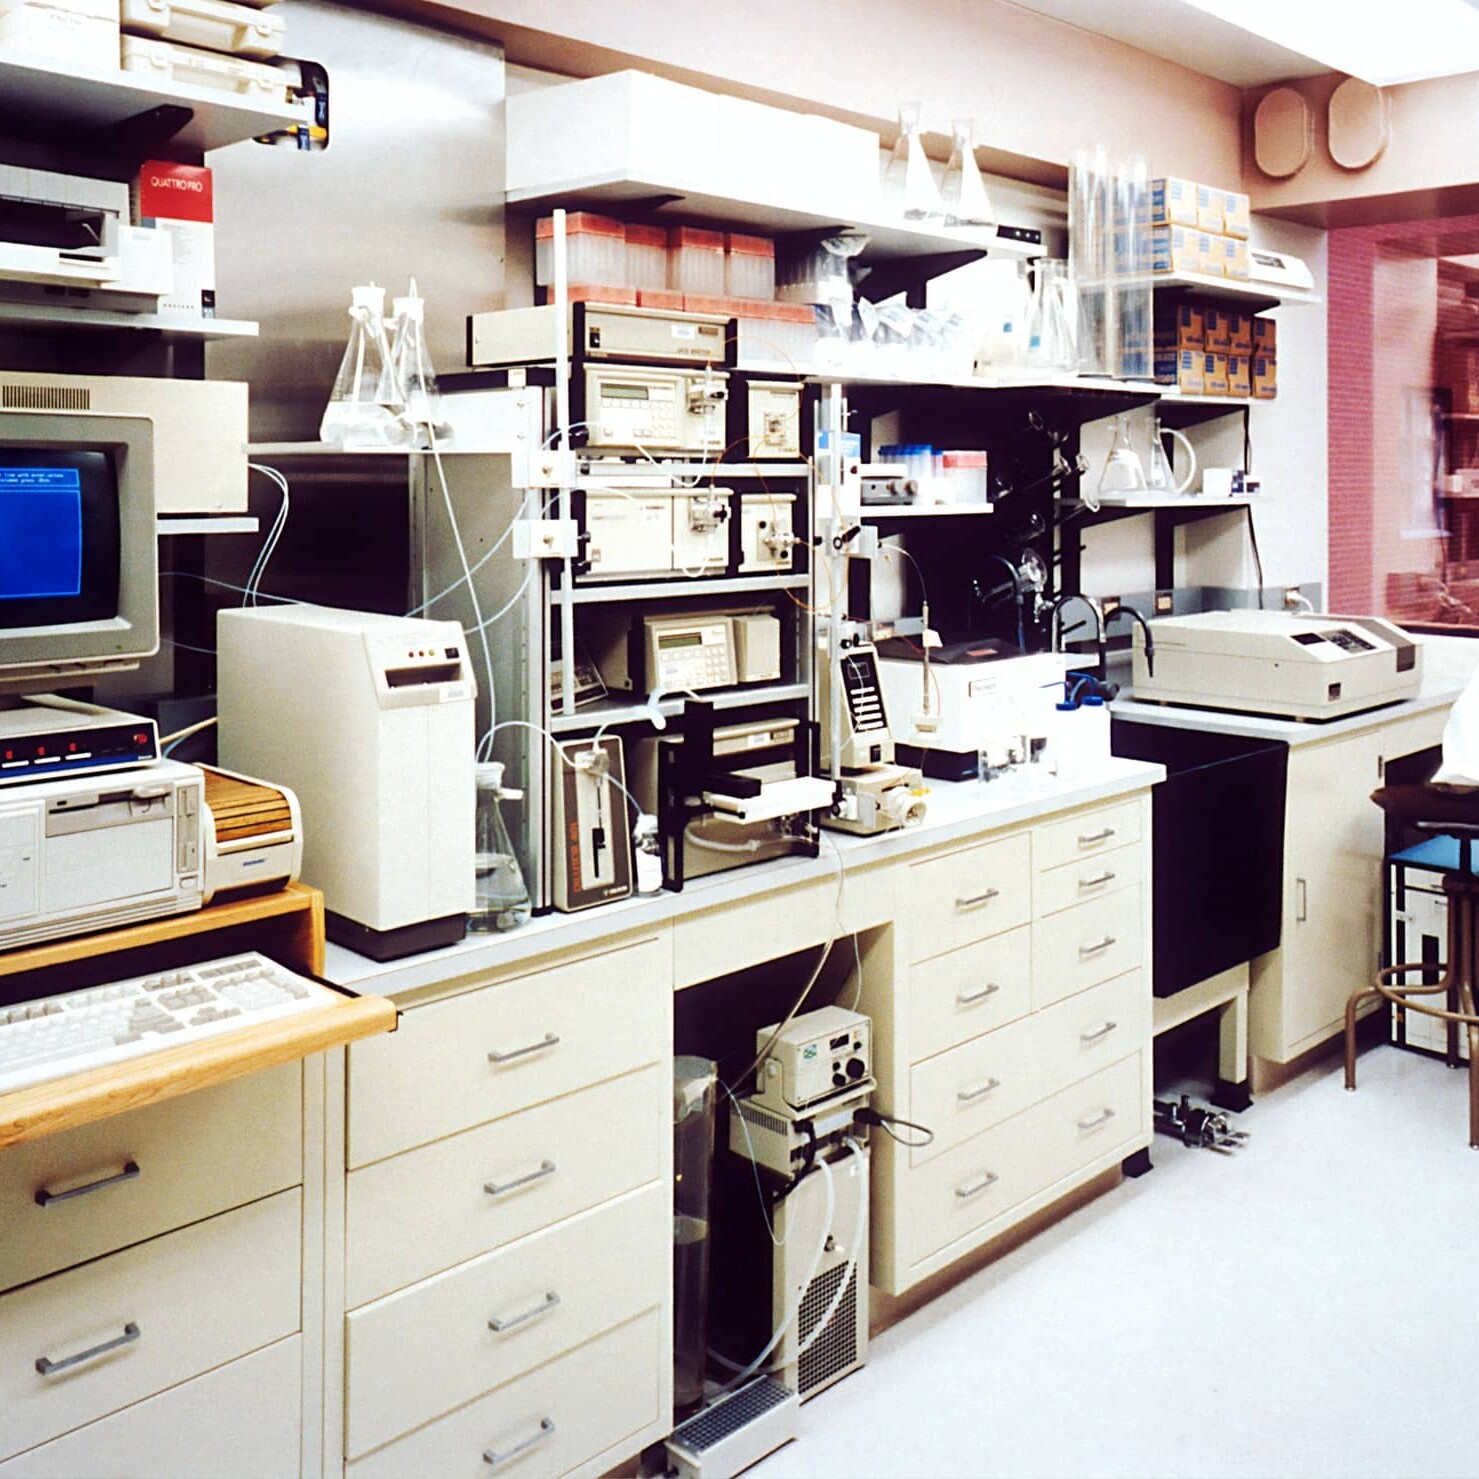 Interior of a medical lab with testing equipment and computer units on the shelves